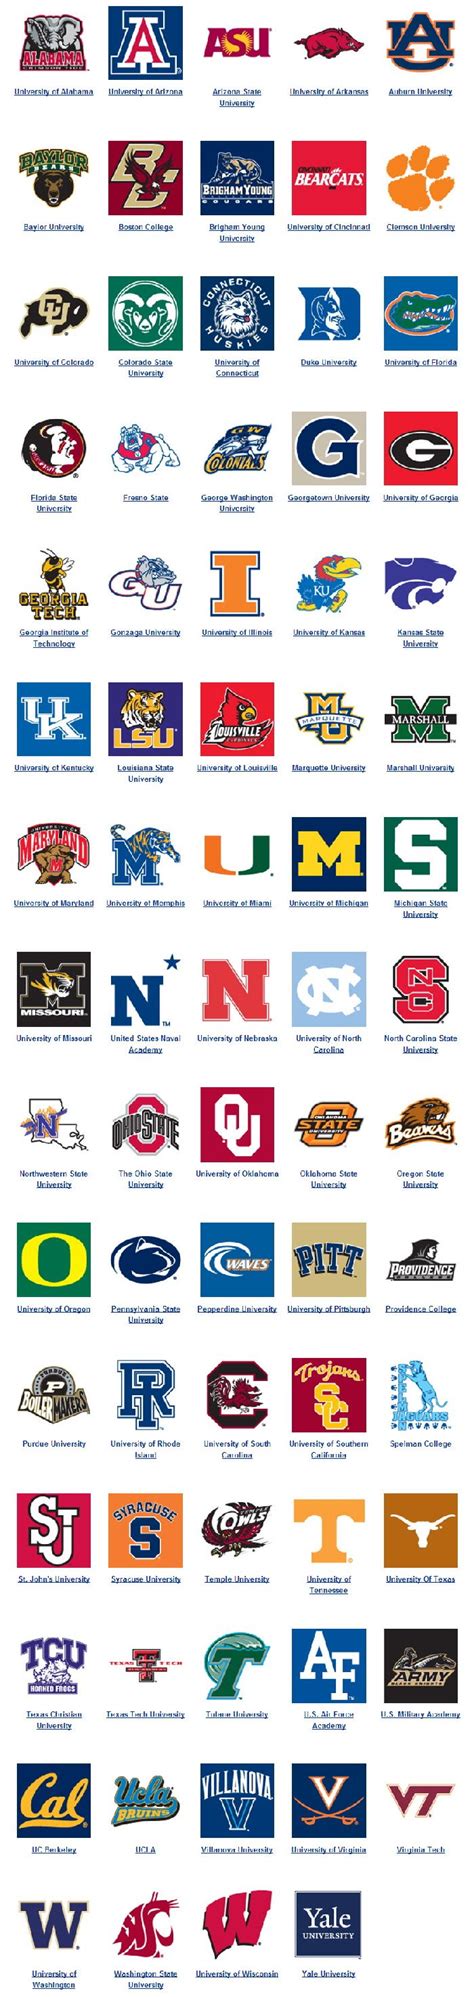 Pin By Andrea Castleberry On Sports College Football Teams College